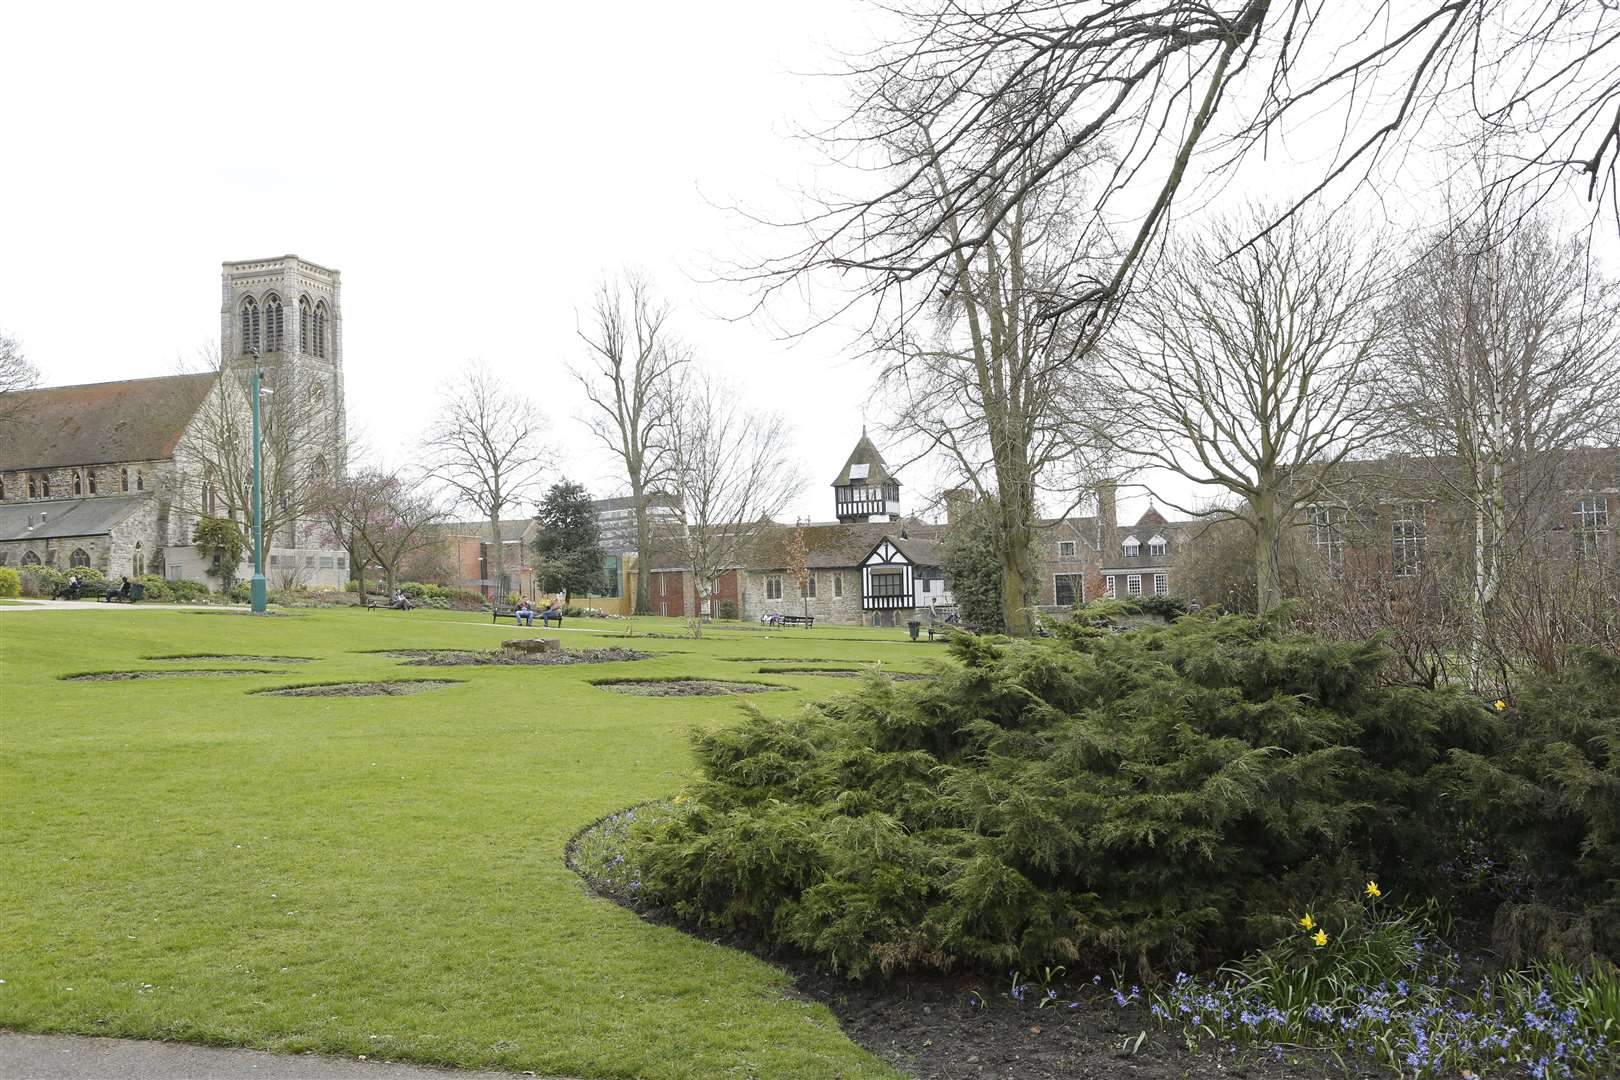 Brenchley Gardens, Maidstone, where the attack happened